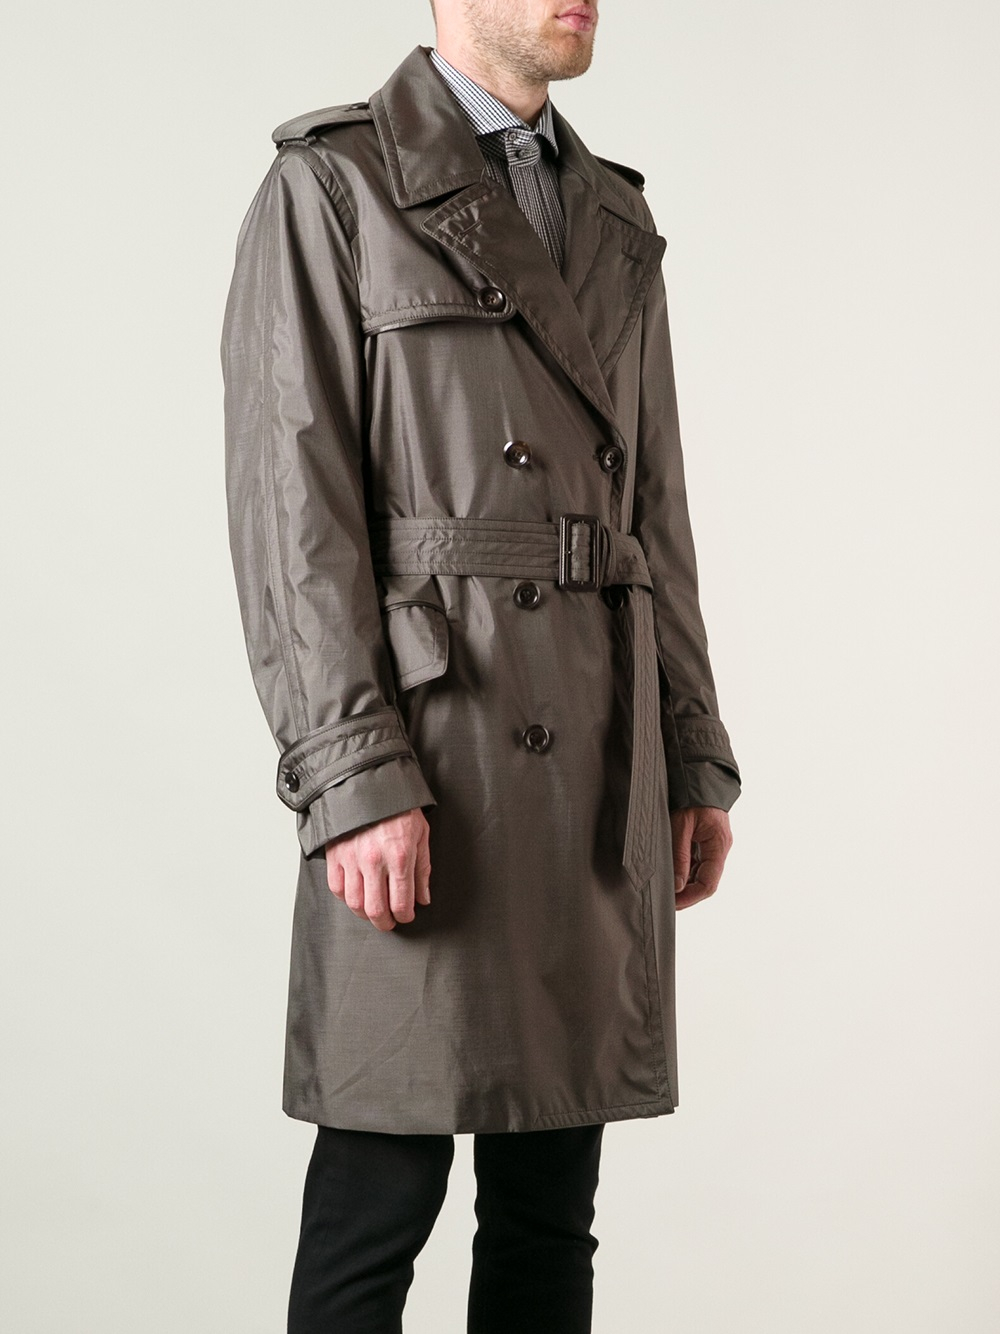 Lyst - Tom Ford Belted Trench Coat in Brown for Men